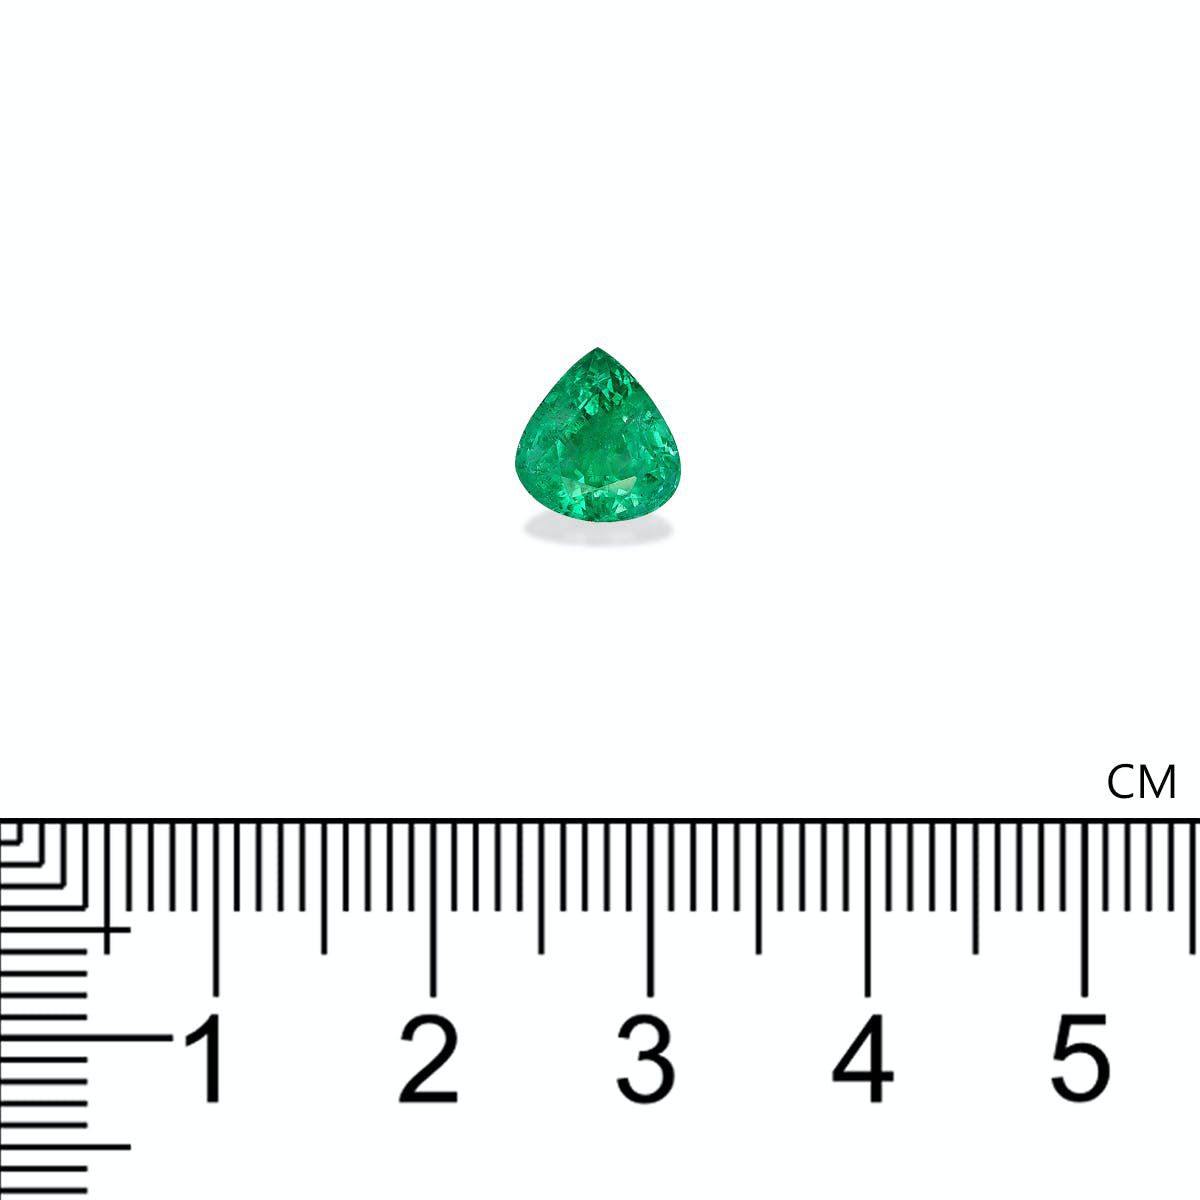 Picture of Green Zambian Emerald 1.90ct - 8mm (PG0350)